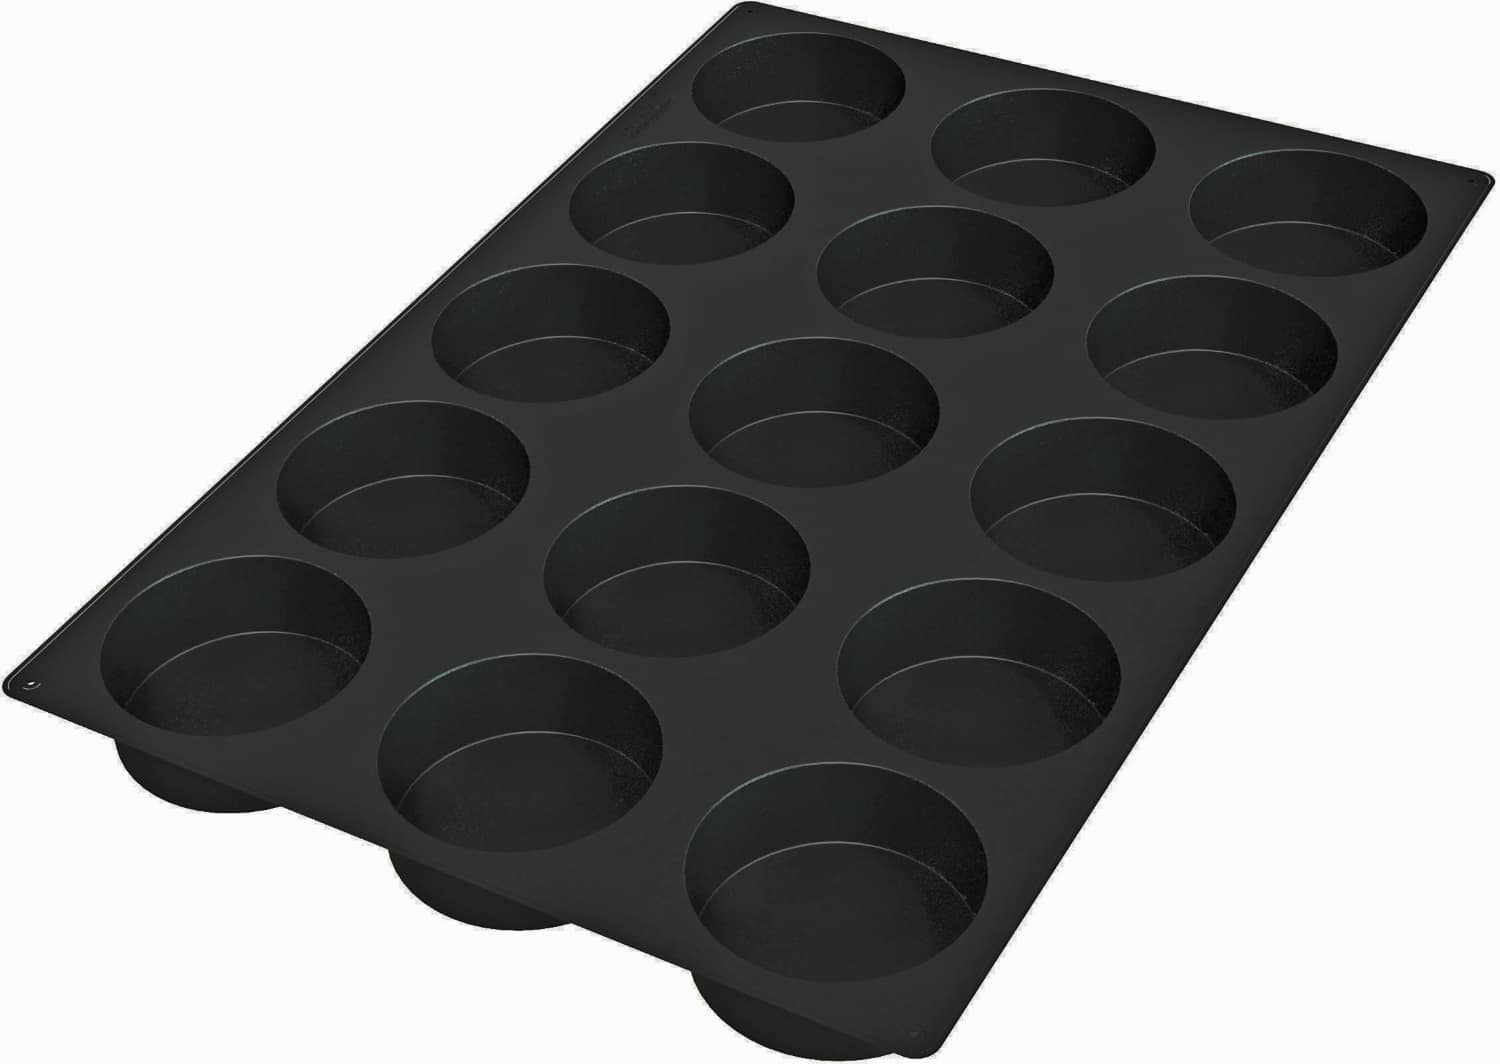 Silicone baking moulds "Sponge cake" 600 x 400 mm 115345